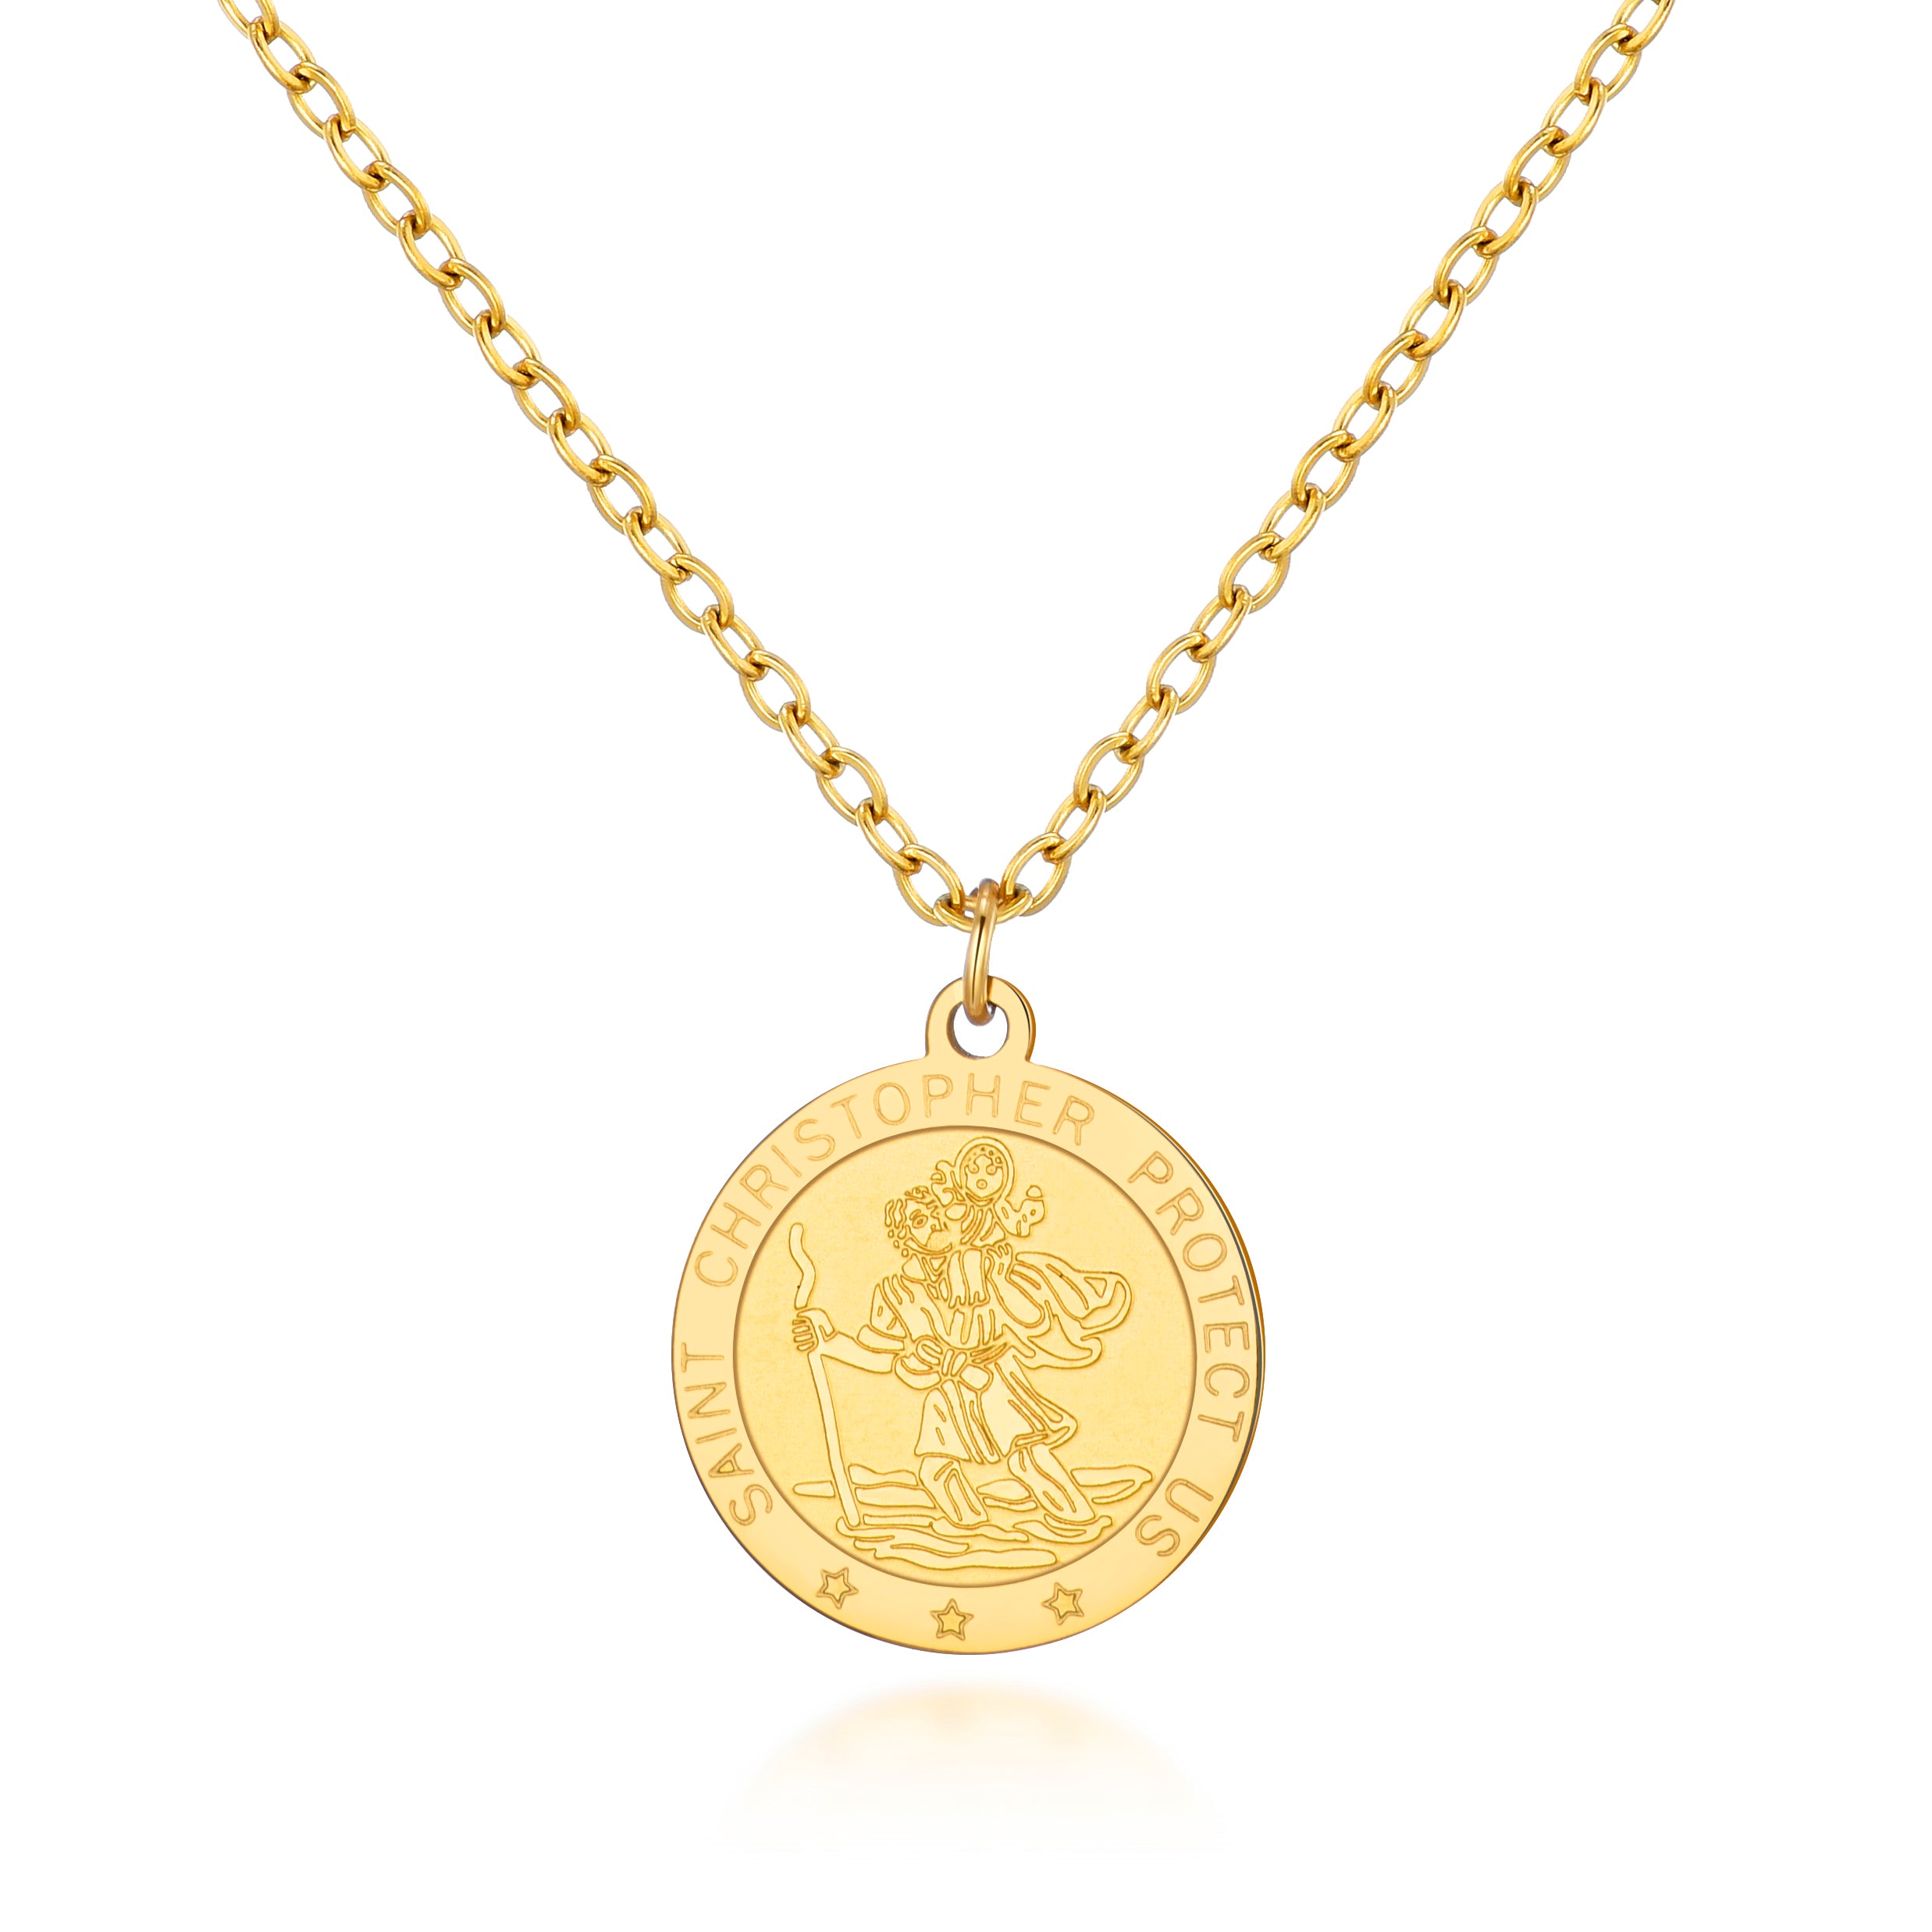 Men's Gold Plated Stainless Steel St Christopher Necklace by Philip Jones Jewellery